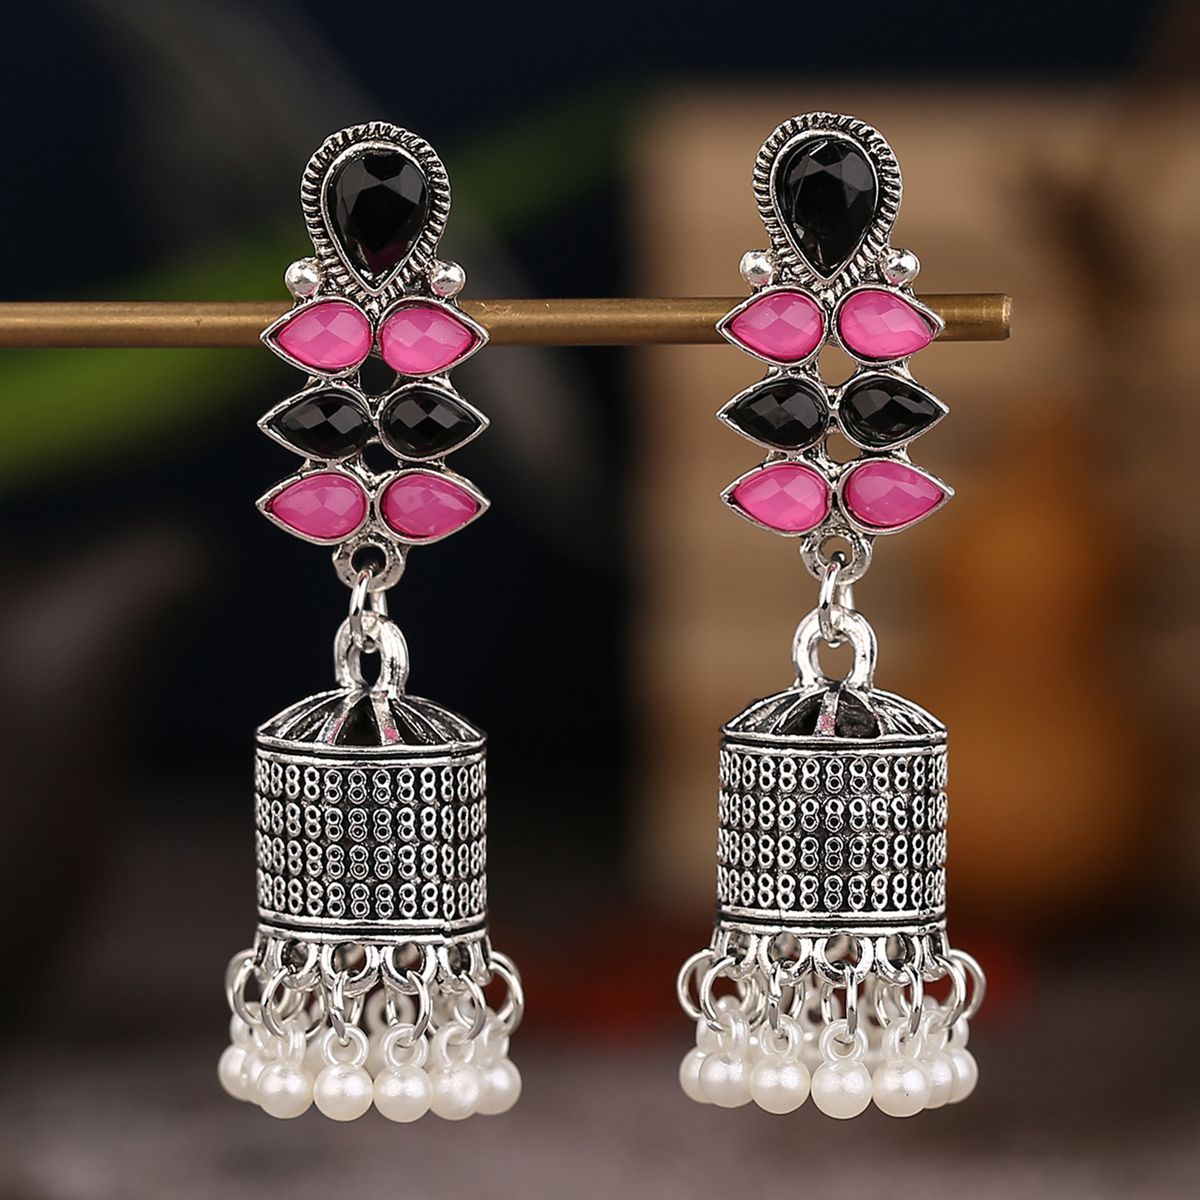 Ethnic-Silver-Color-Bell-Indian-Earrings-For-Women-Pendient-Vintage-Gyspy-CZ-Leaf-Ladies-Earring-Jew-1005003740209370-4